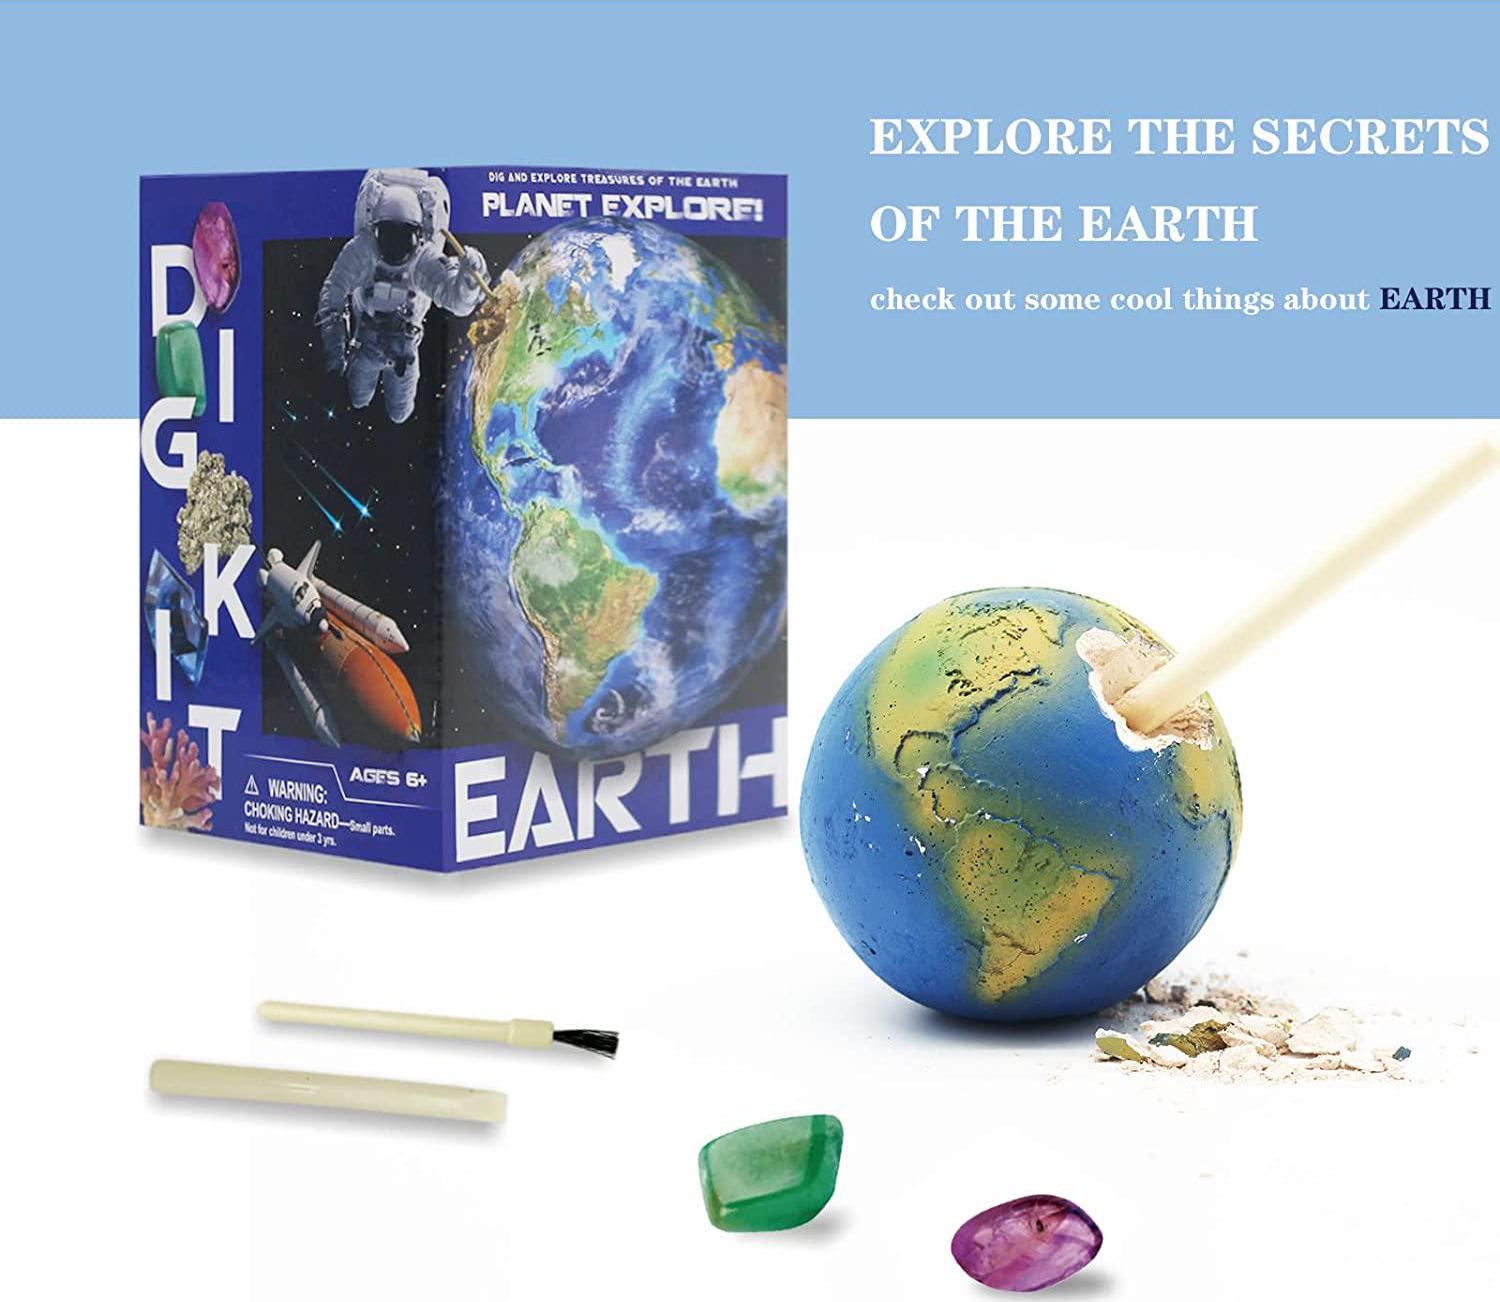 Eayaele, Eayaele Earth Planet Explore Dig Kit Toy of Solar System, Mining Archaeology Toy Includes with 4 Real Genuine Gemstone Gems Rocks for Dig, Educational Science Kit Toys